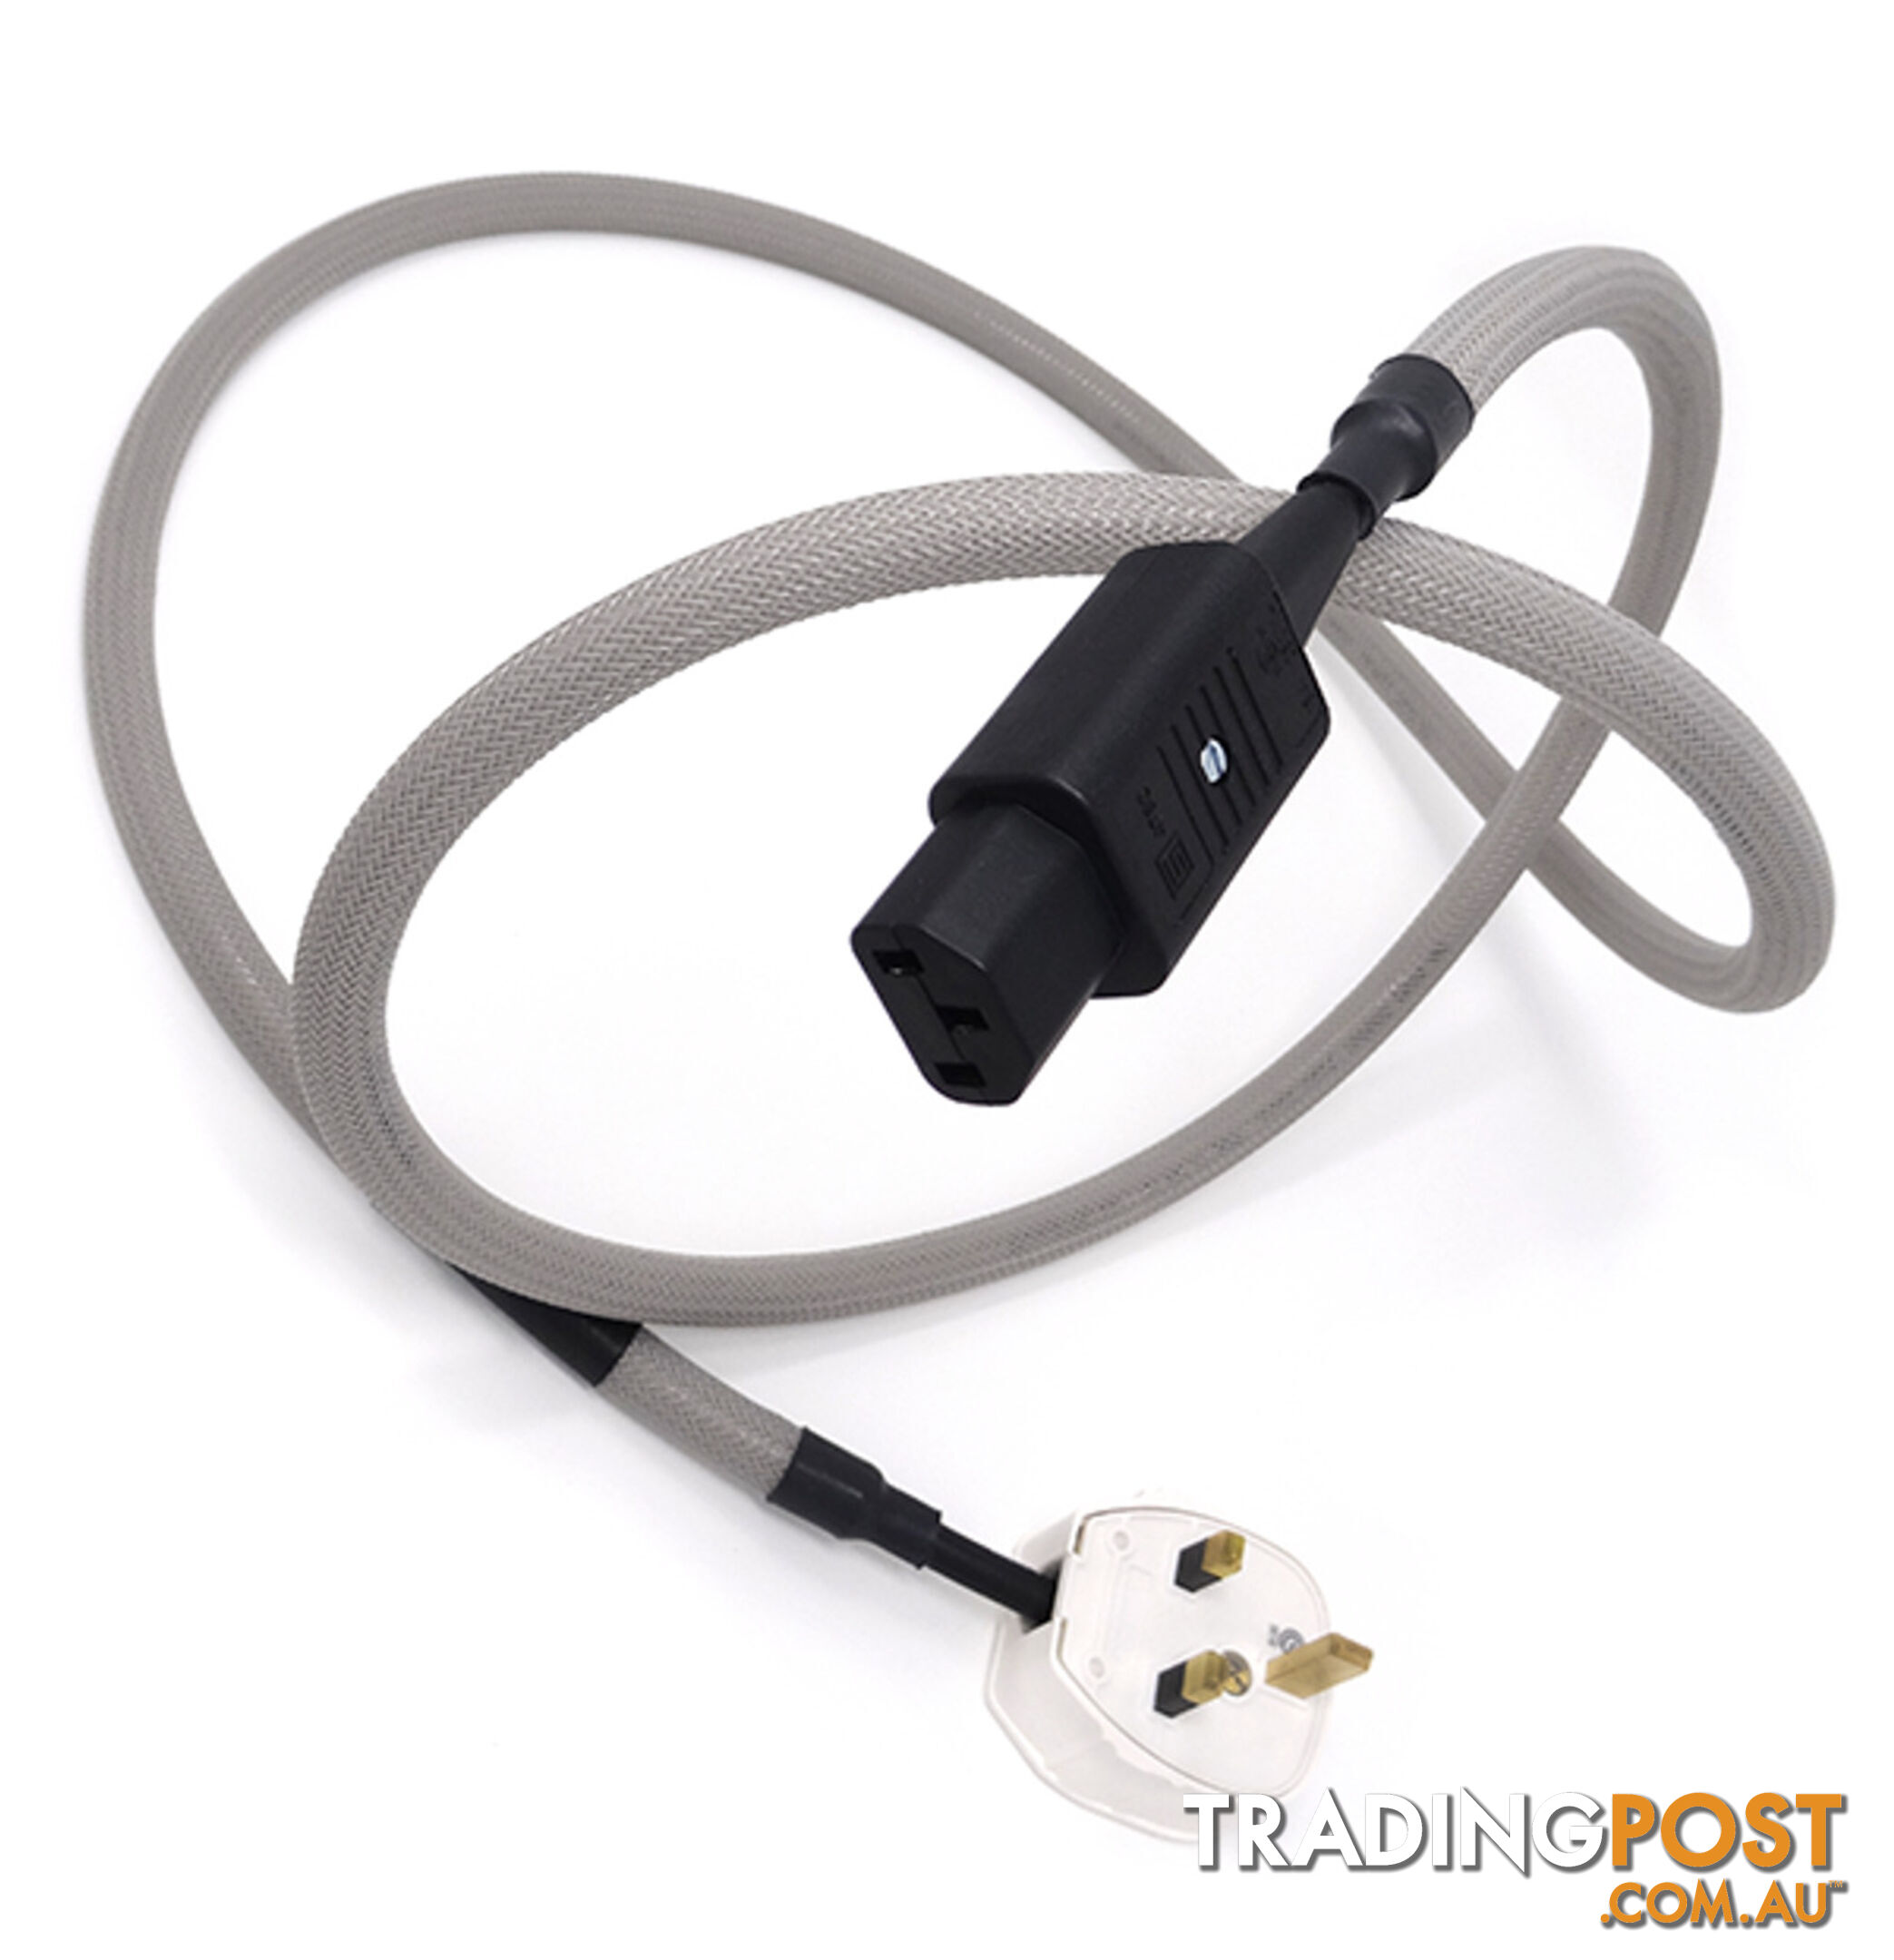 Chord Shawline Power Cable